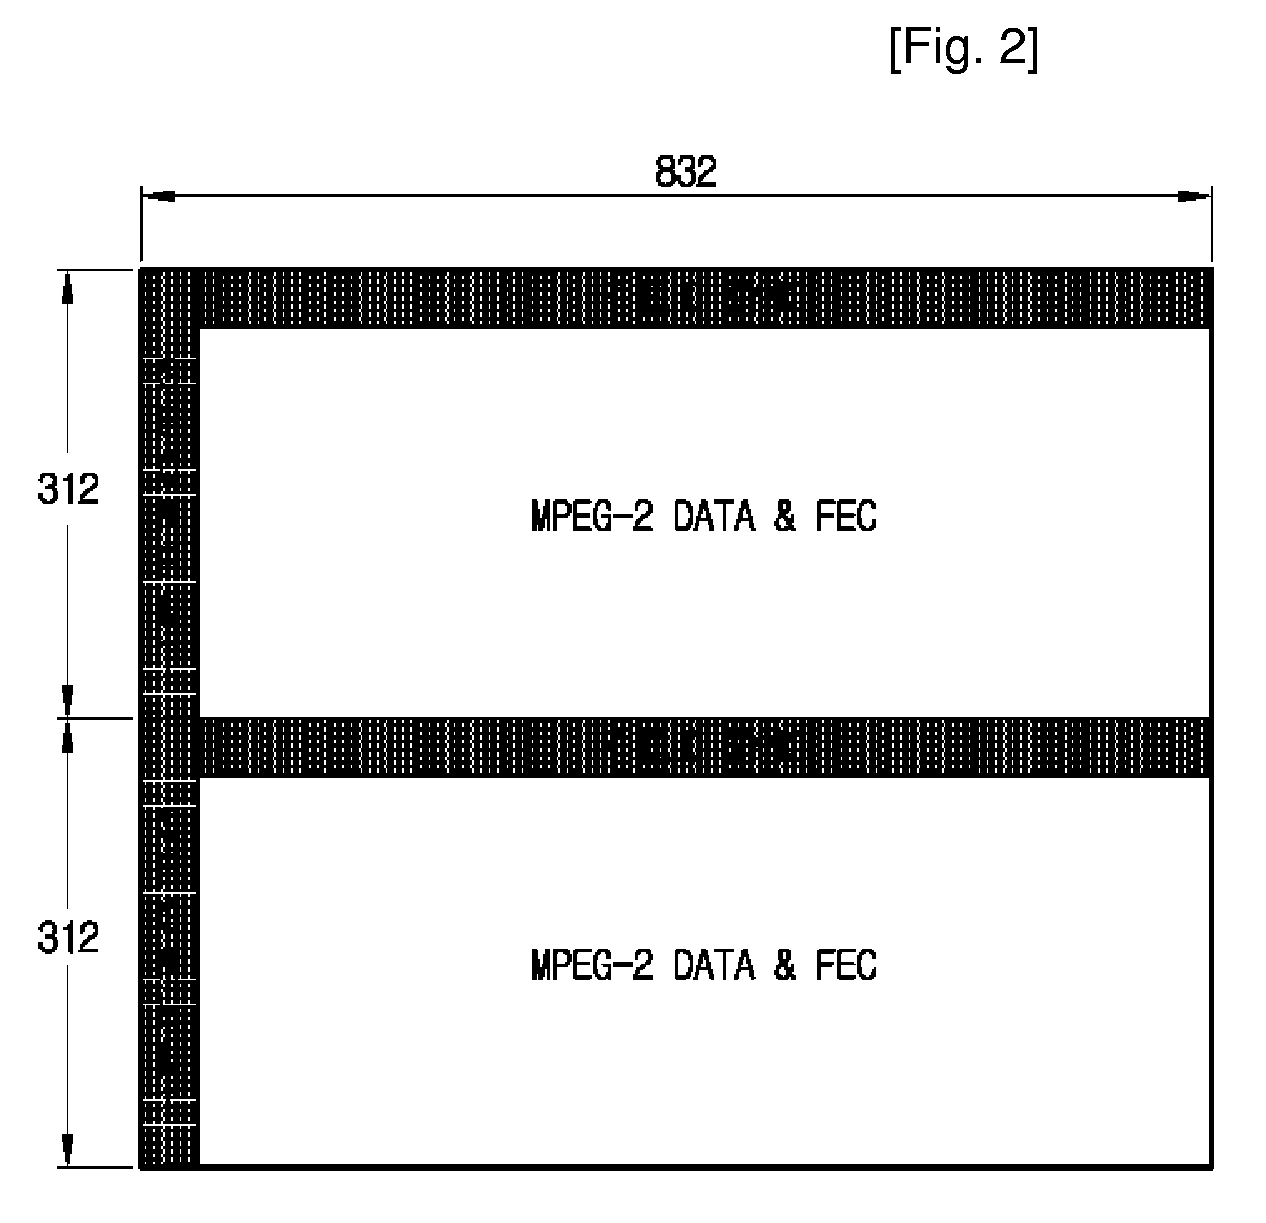 Digital Broadcasting Transmission/Reception System Utilizing Srs and Trs Code to Improve Receiving Performance and Signal Processing Method Thereof